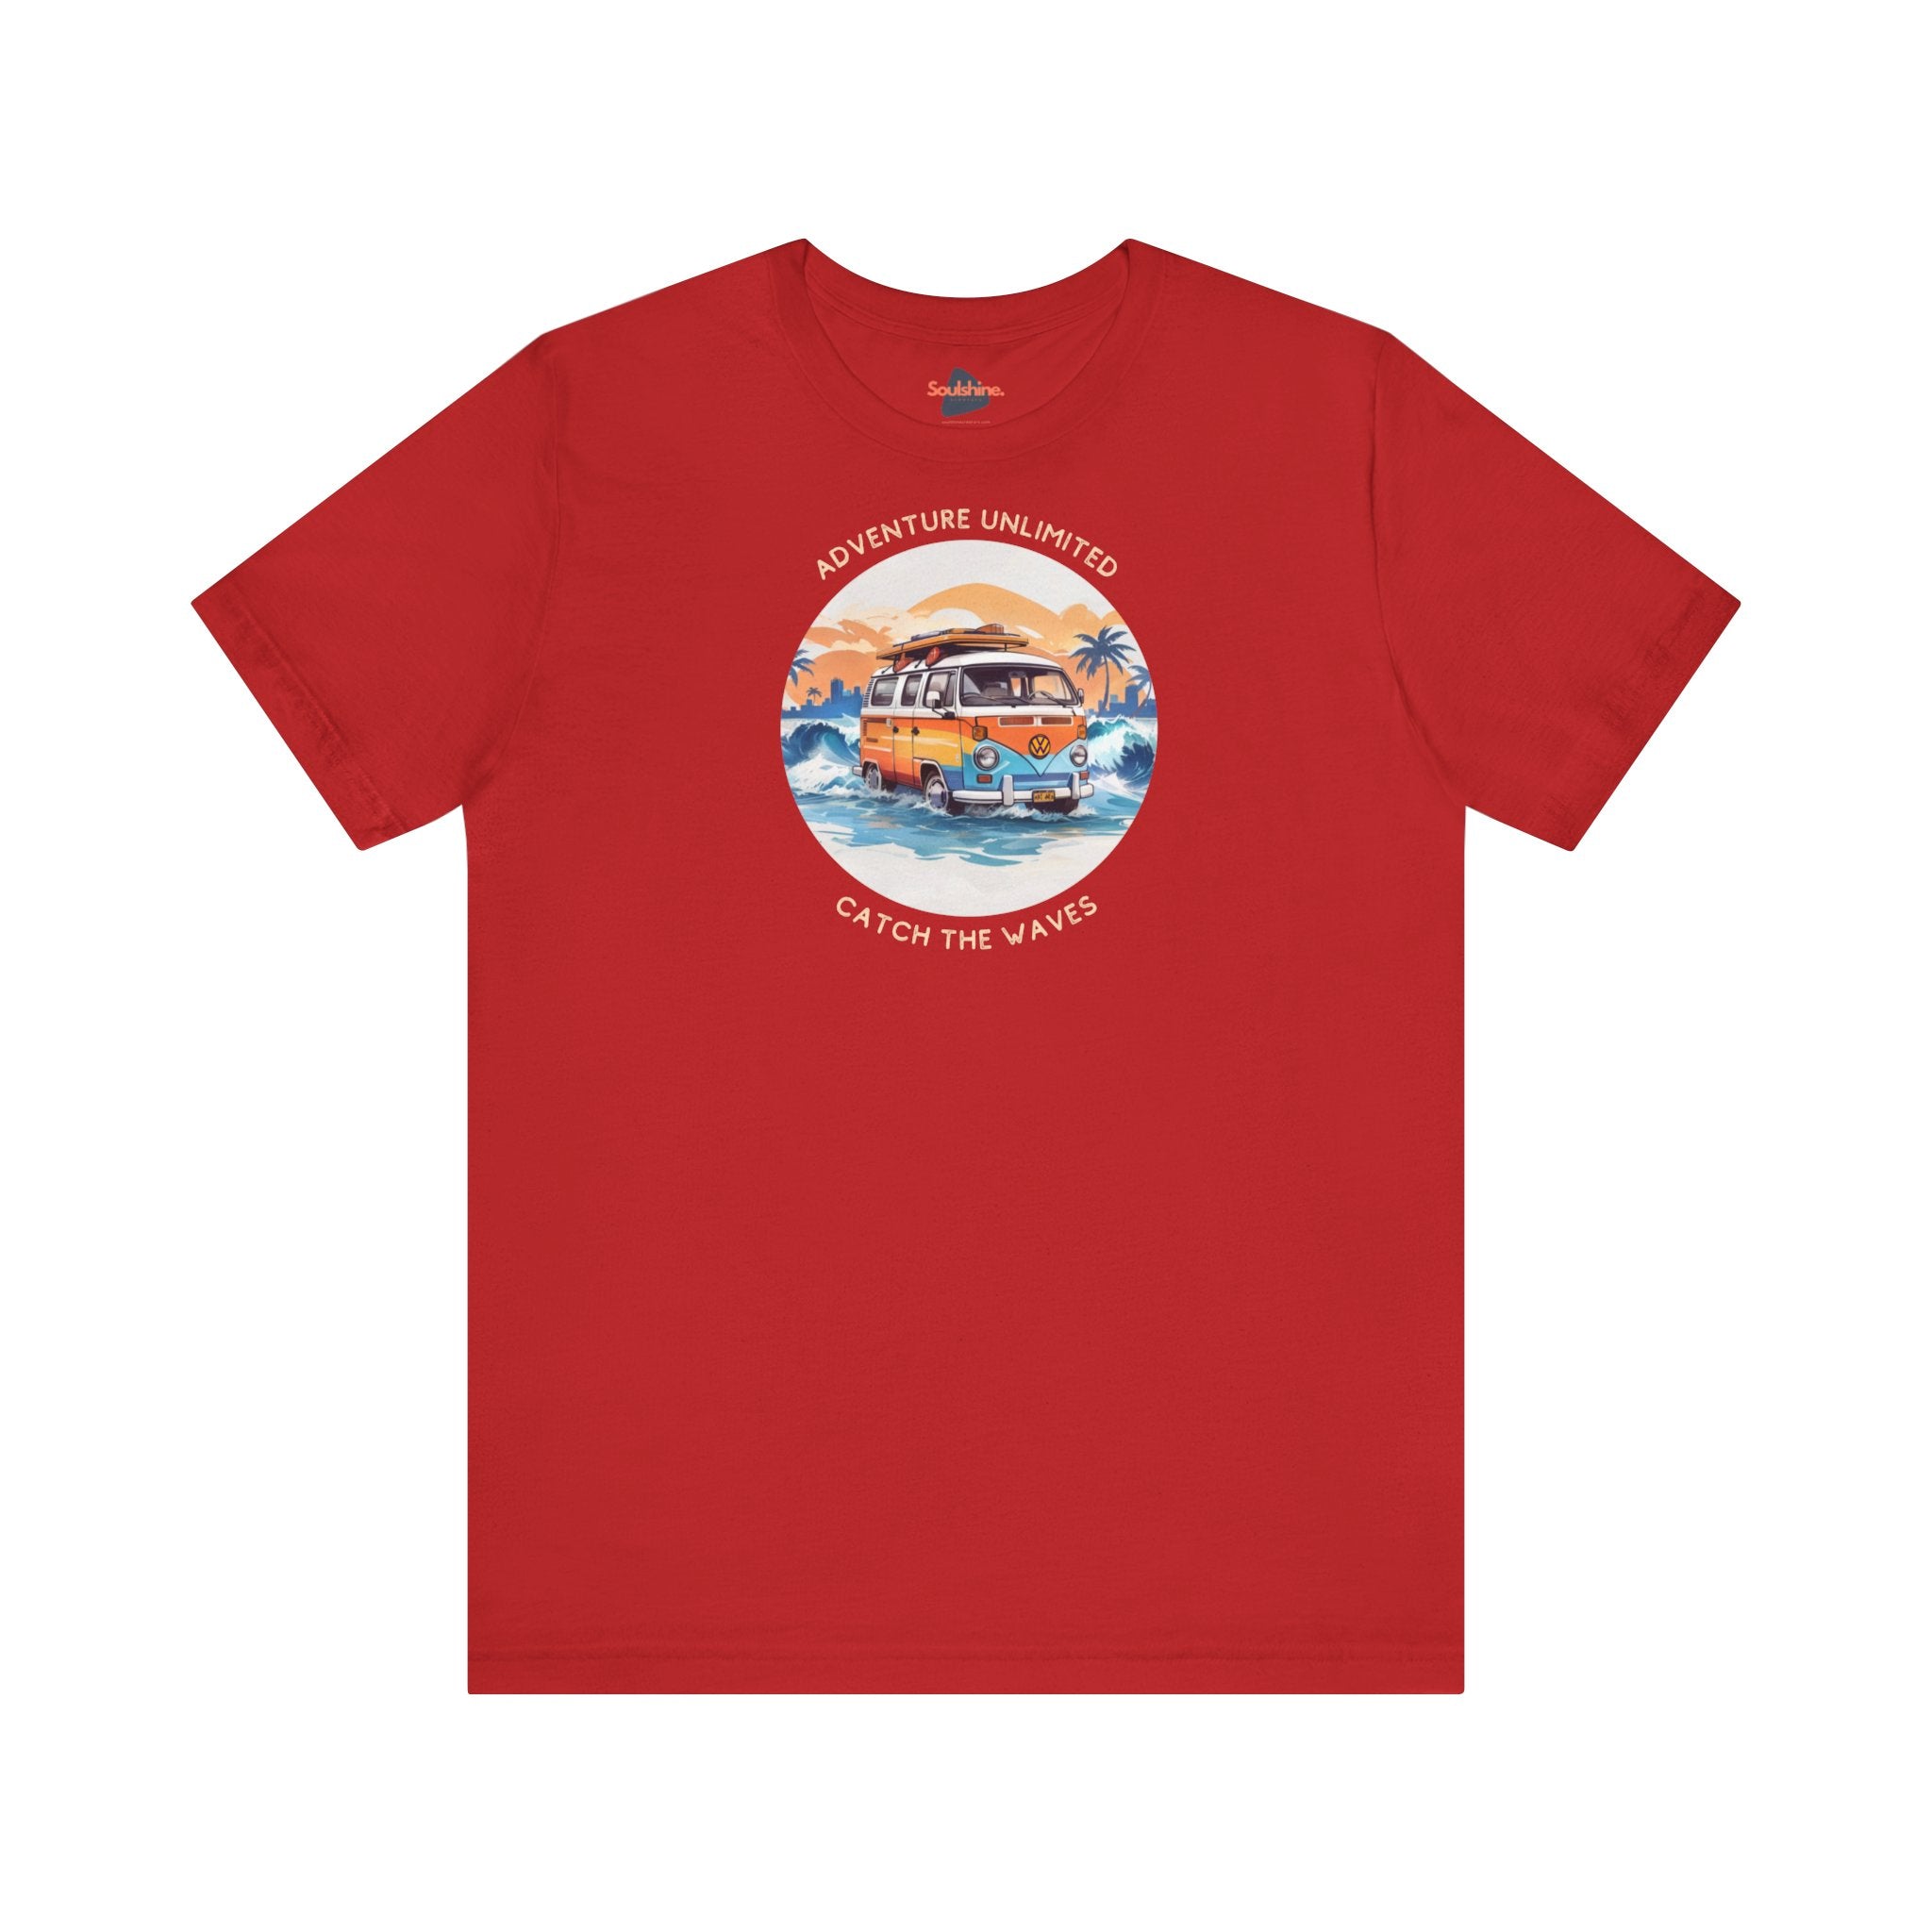 Red camper graphic T-shirt by Adventure Unlimited - Surfing Tee - Soulshinecreators - Bella Canvas EU, direct-to-garment printed item